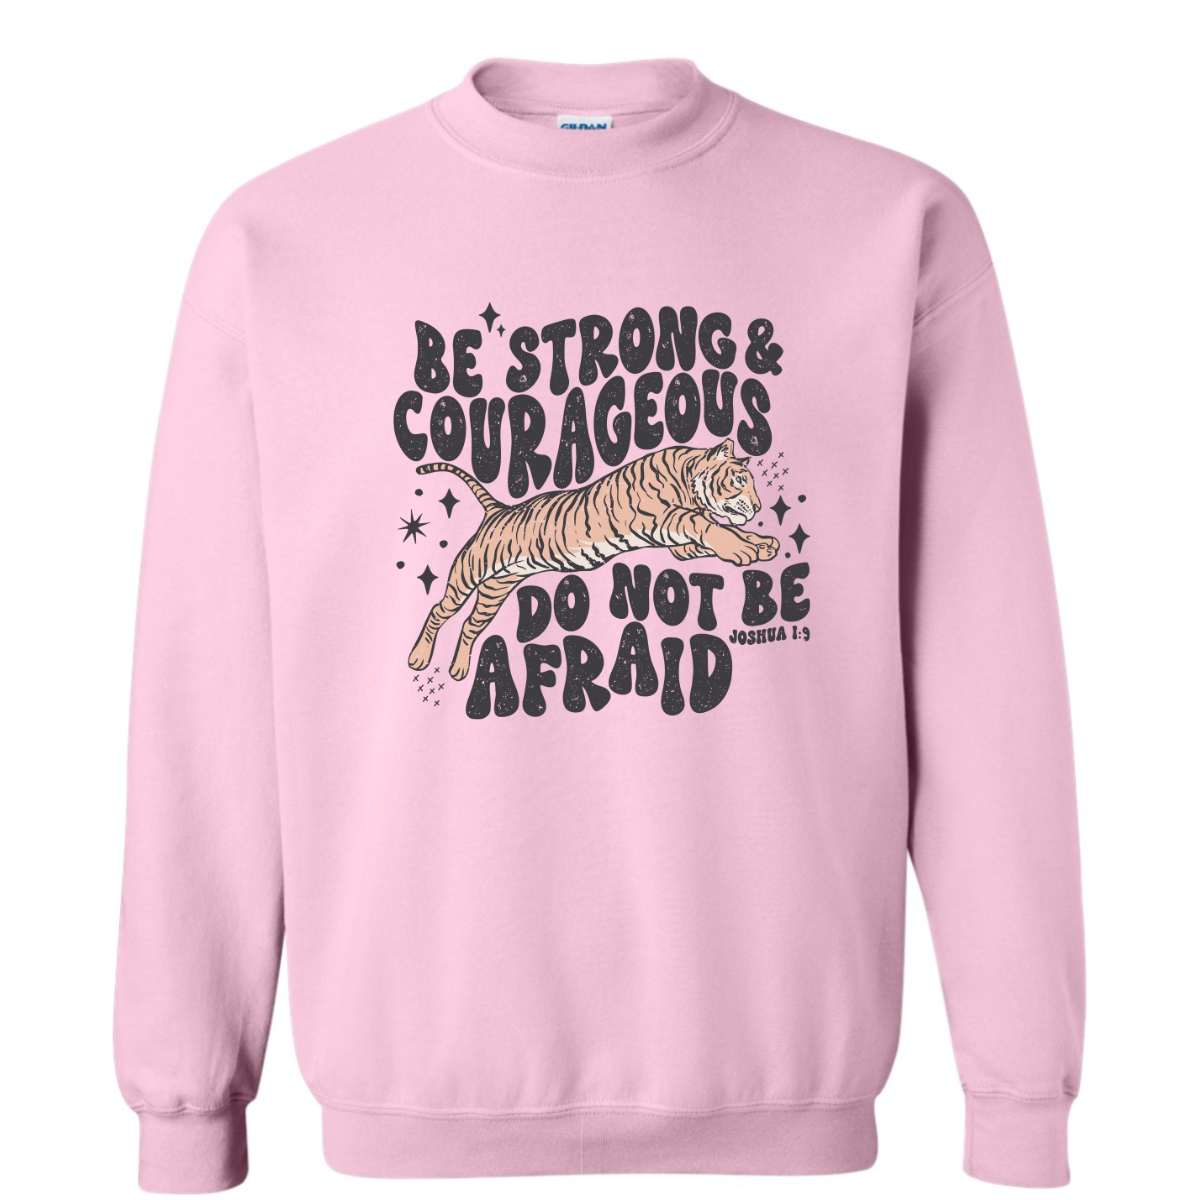 Be Strong and Courageous, Do Not Be Afraid